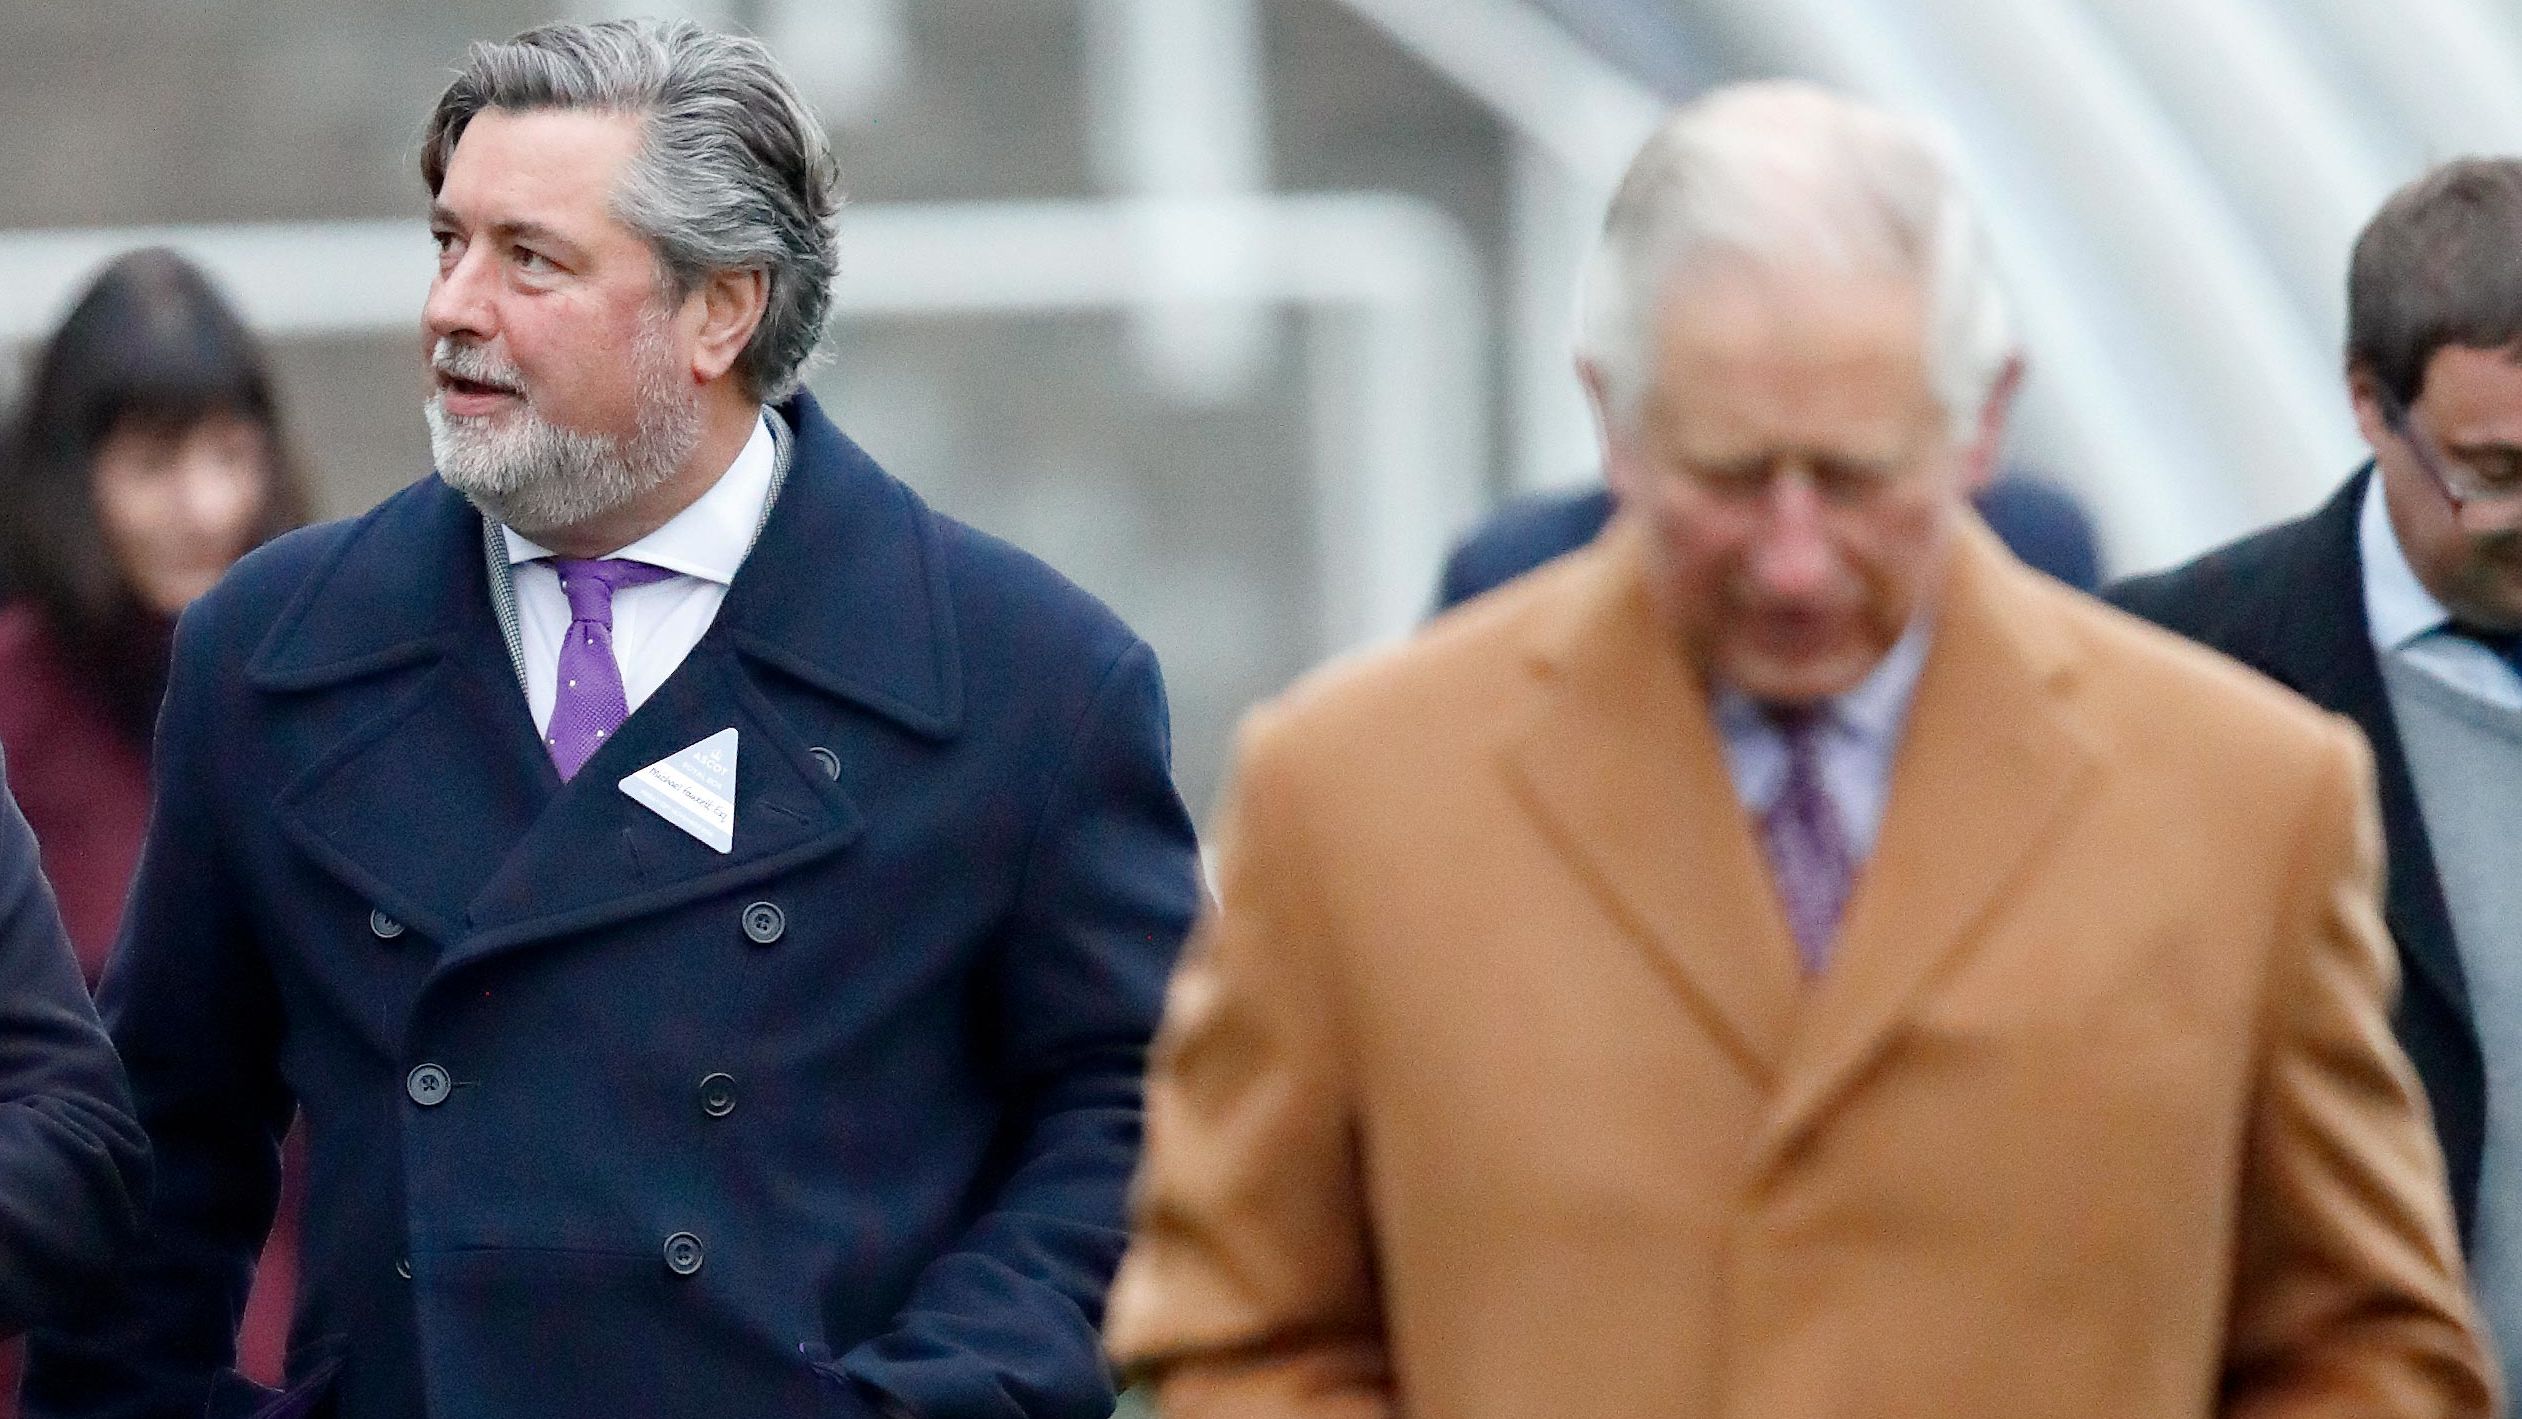 Michael Fawcett, former valet to Prince Charles and current chief executive of the Prince's Foundation (L), accompanies Prince Charles at Ascot Racecourse in England on November 23, 2018.